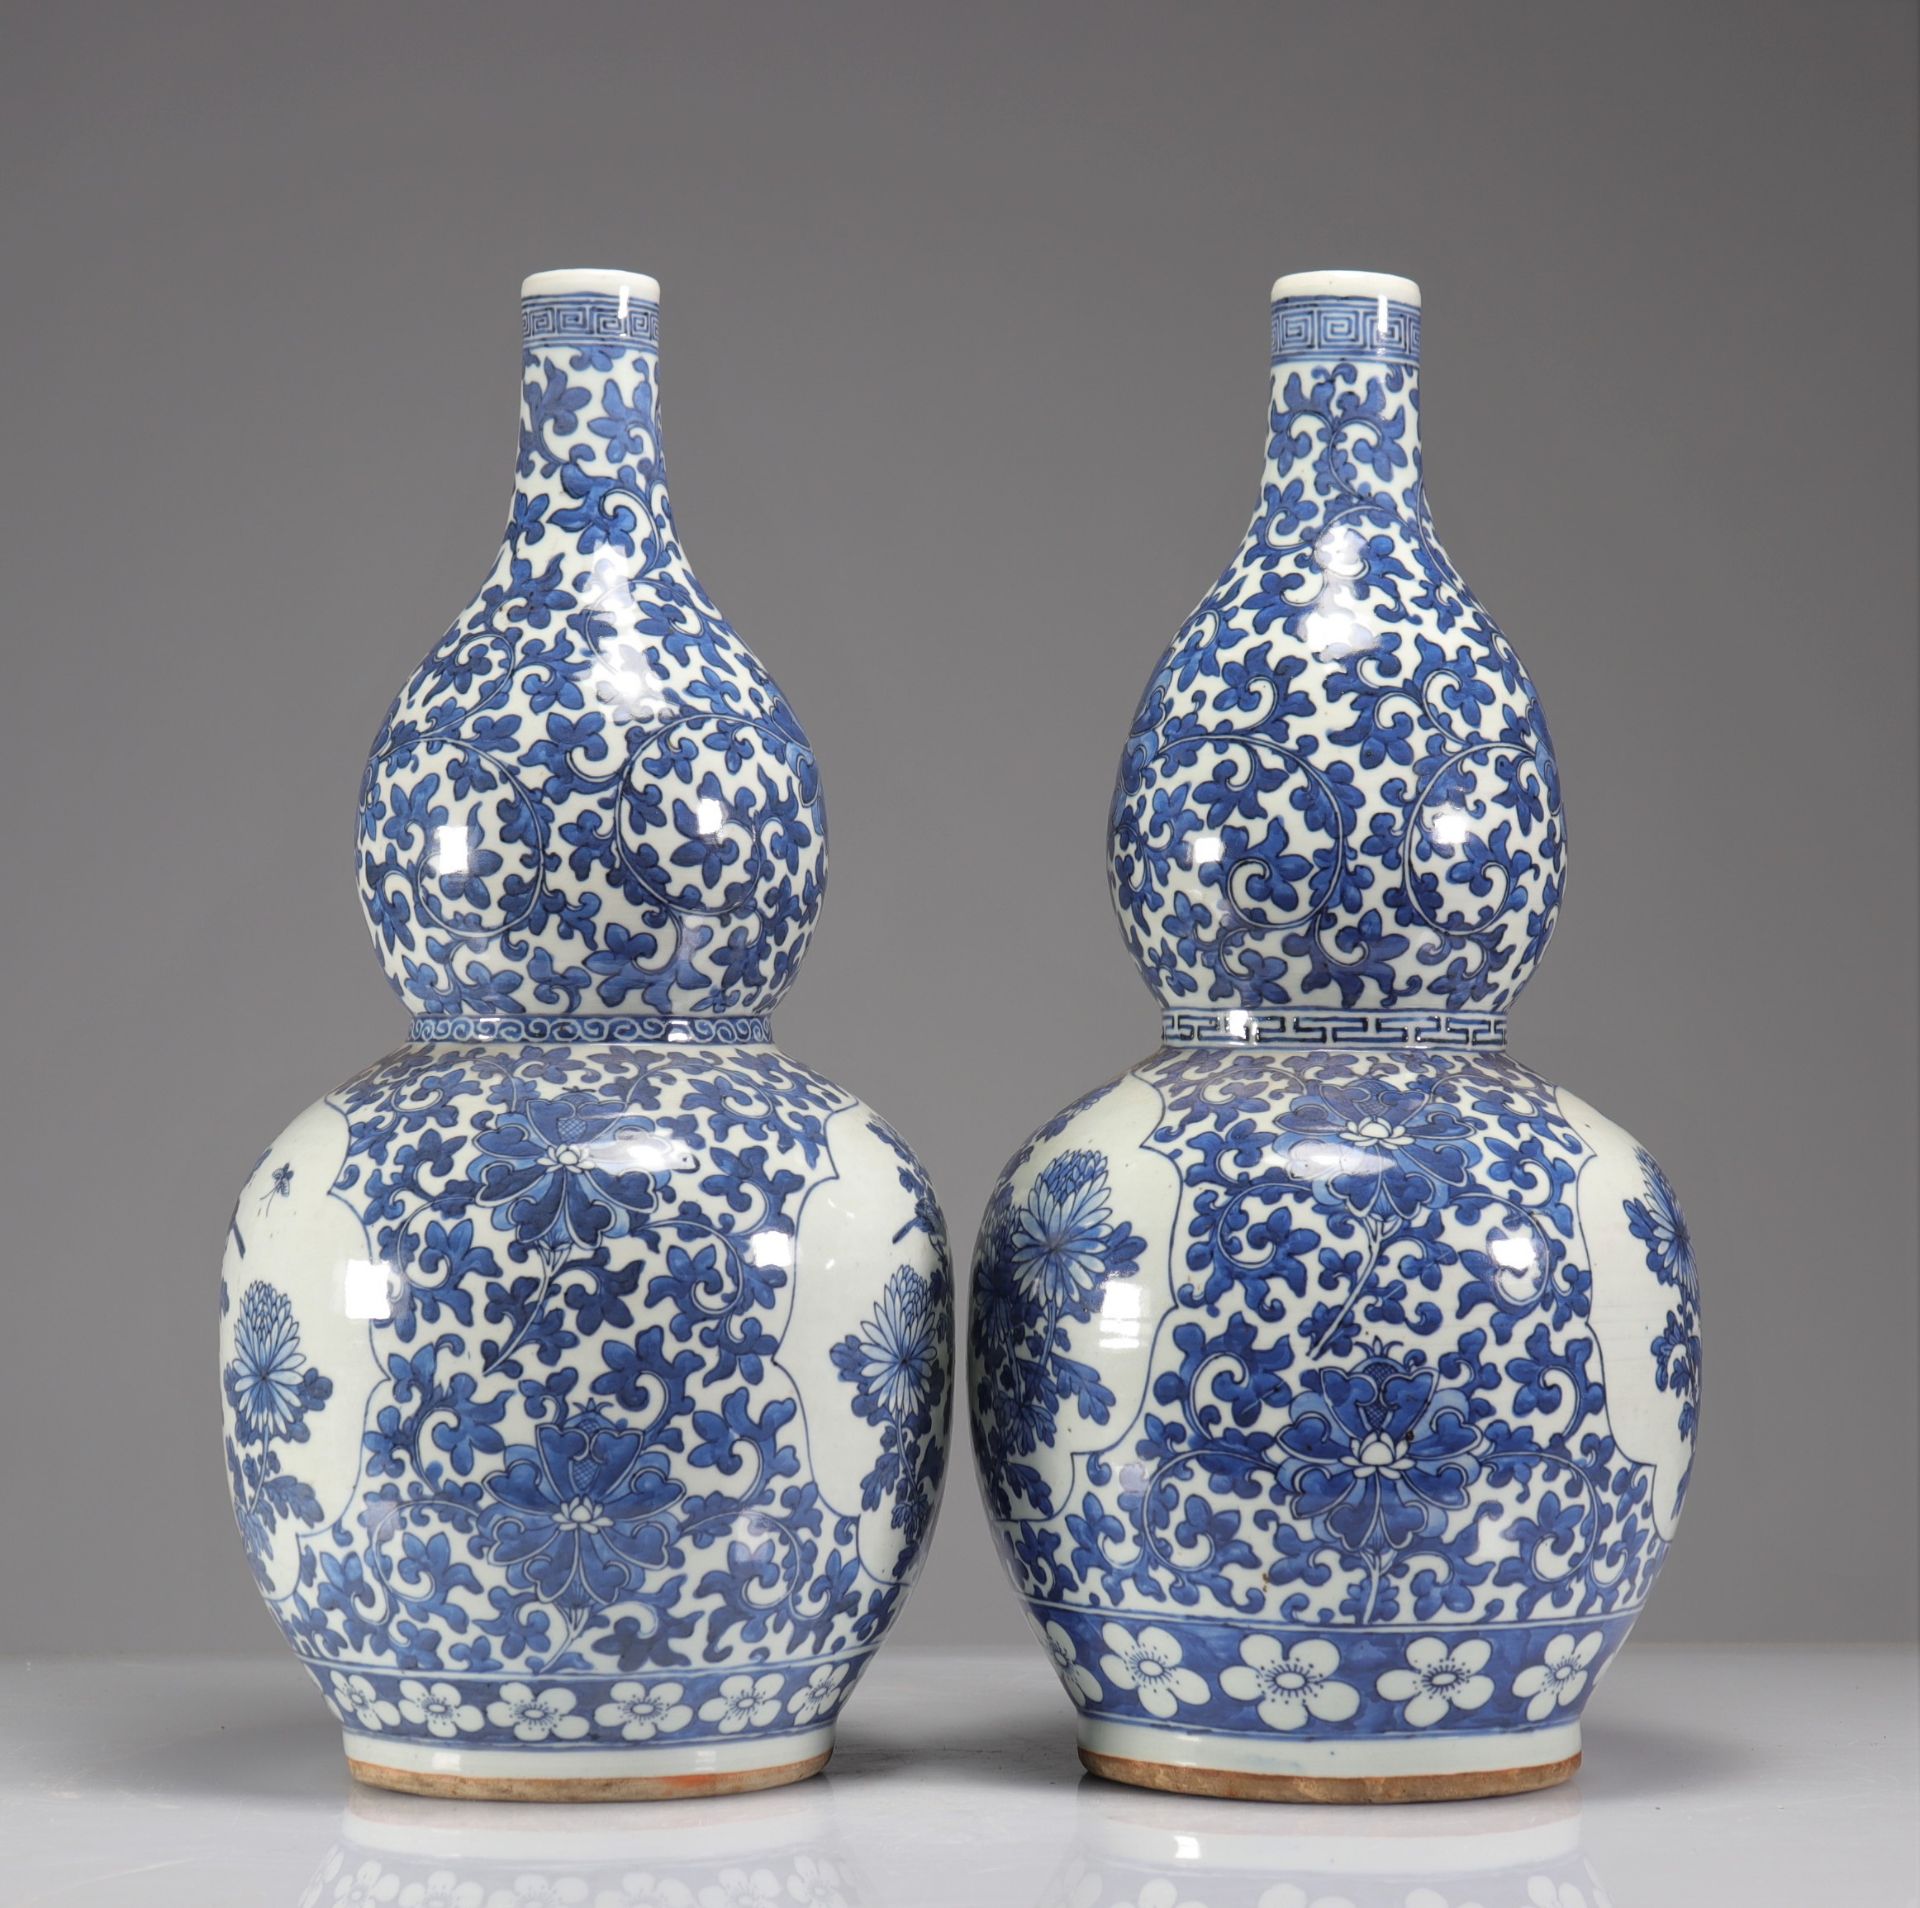 Pair of double-gourd vases in blue-white enamelled porcelain decorated with floriform medallions of - Image 4 of 5